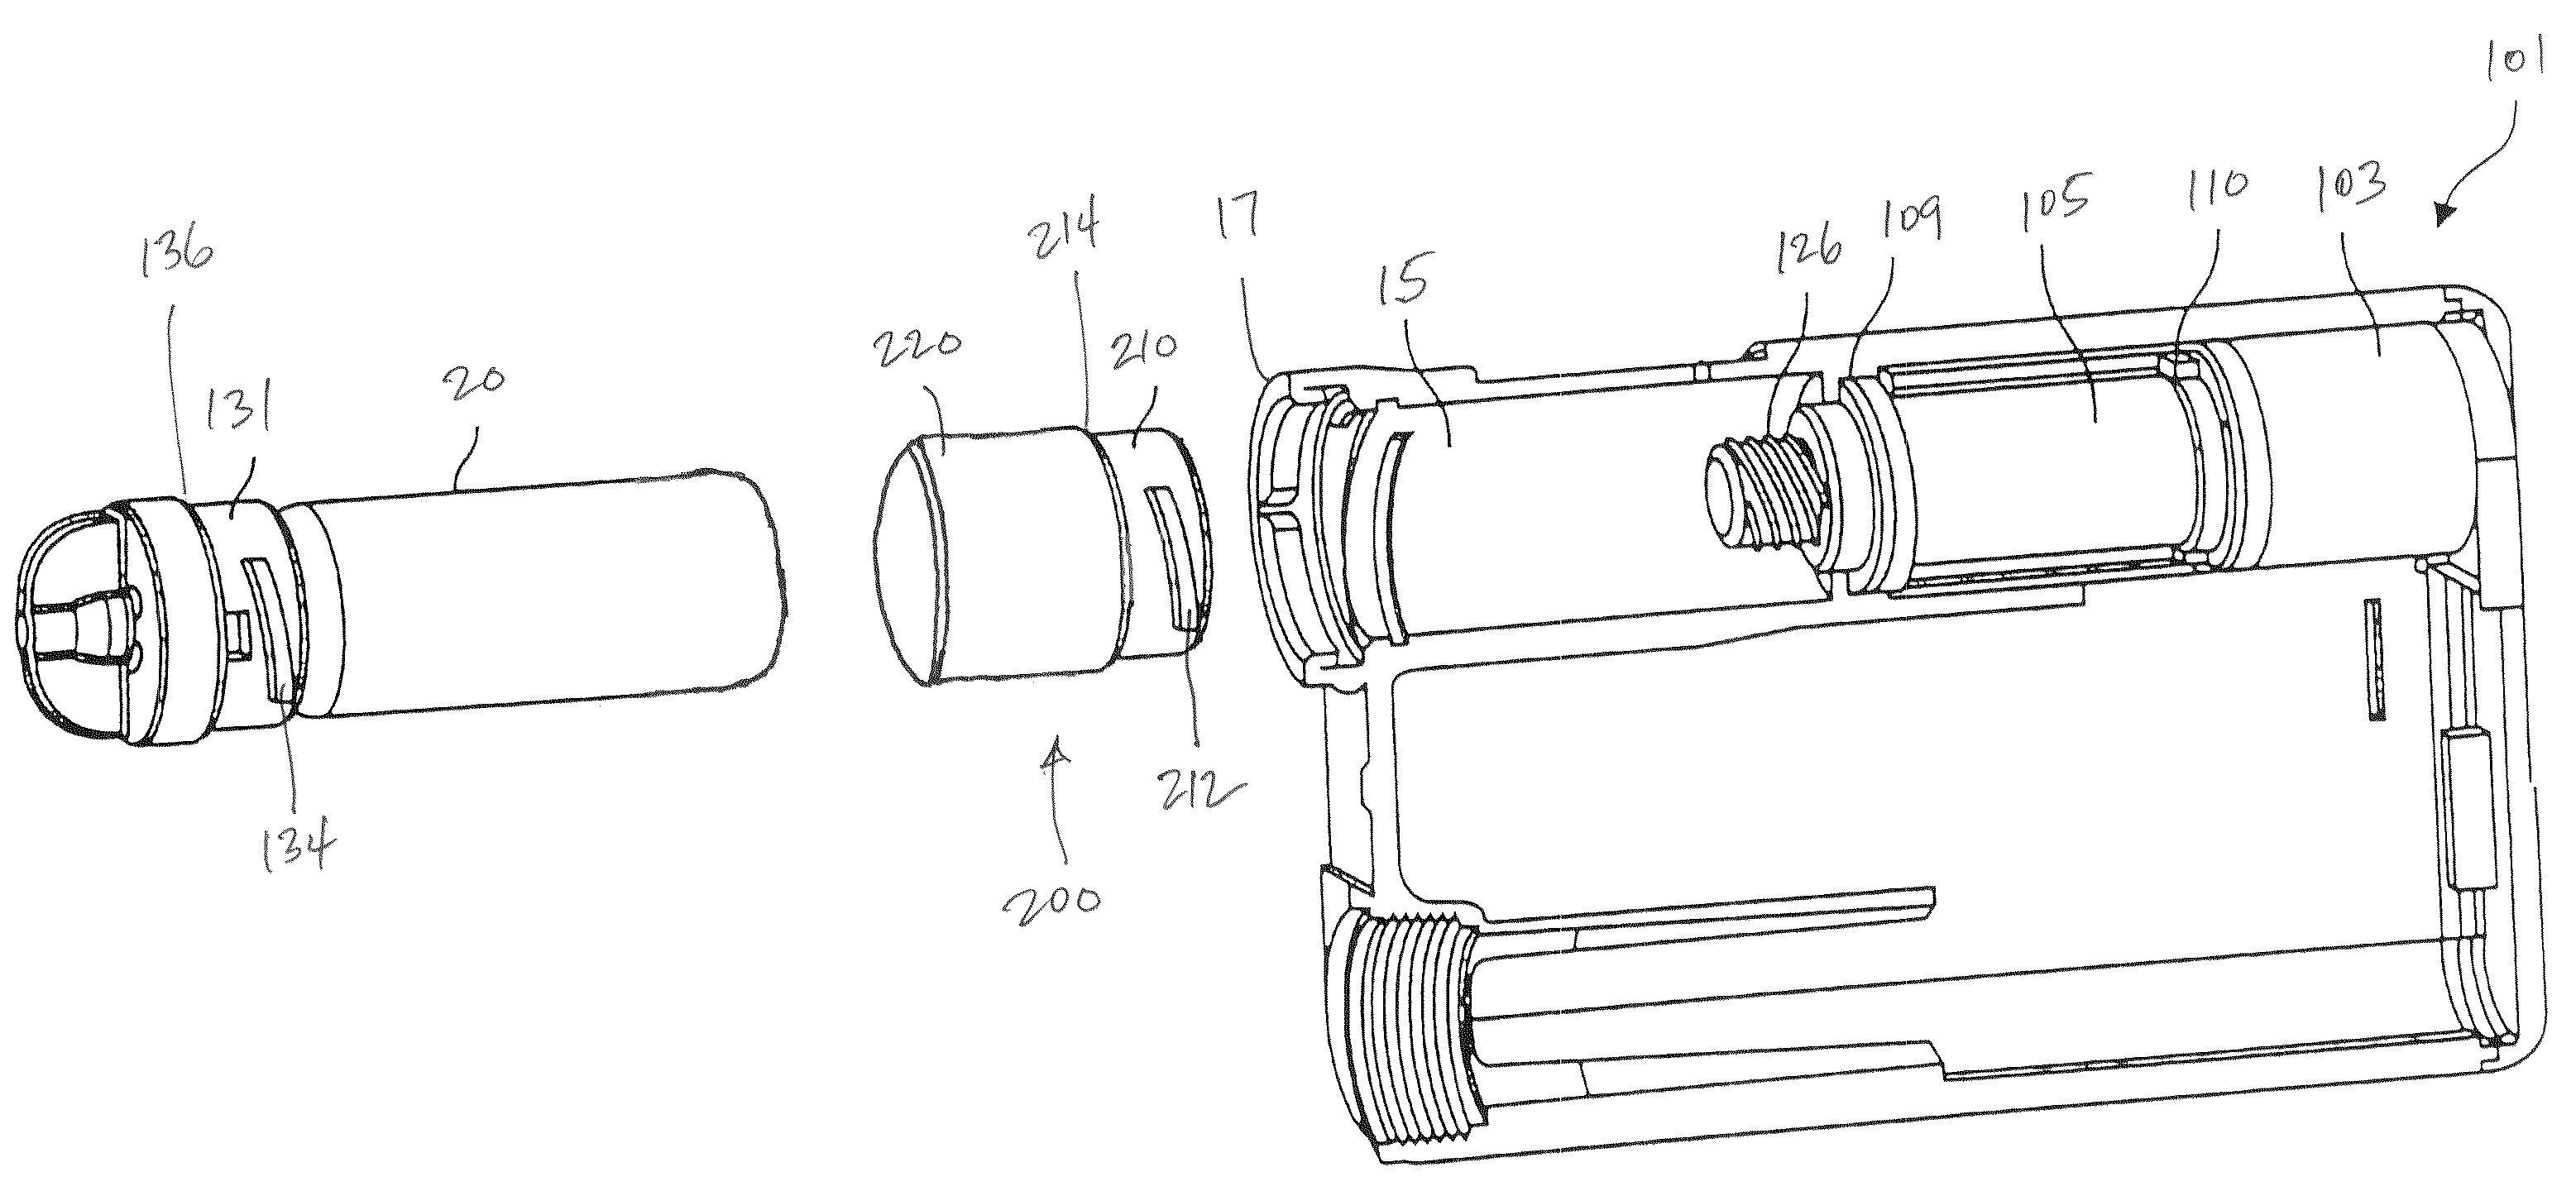 Reservoir compartment adapter for infusion device